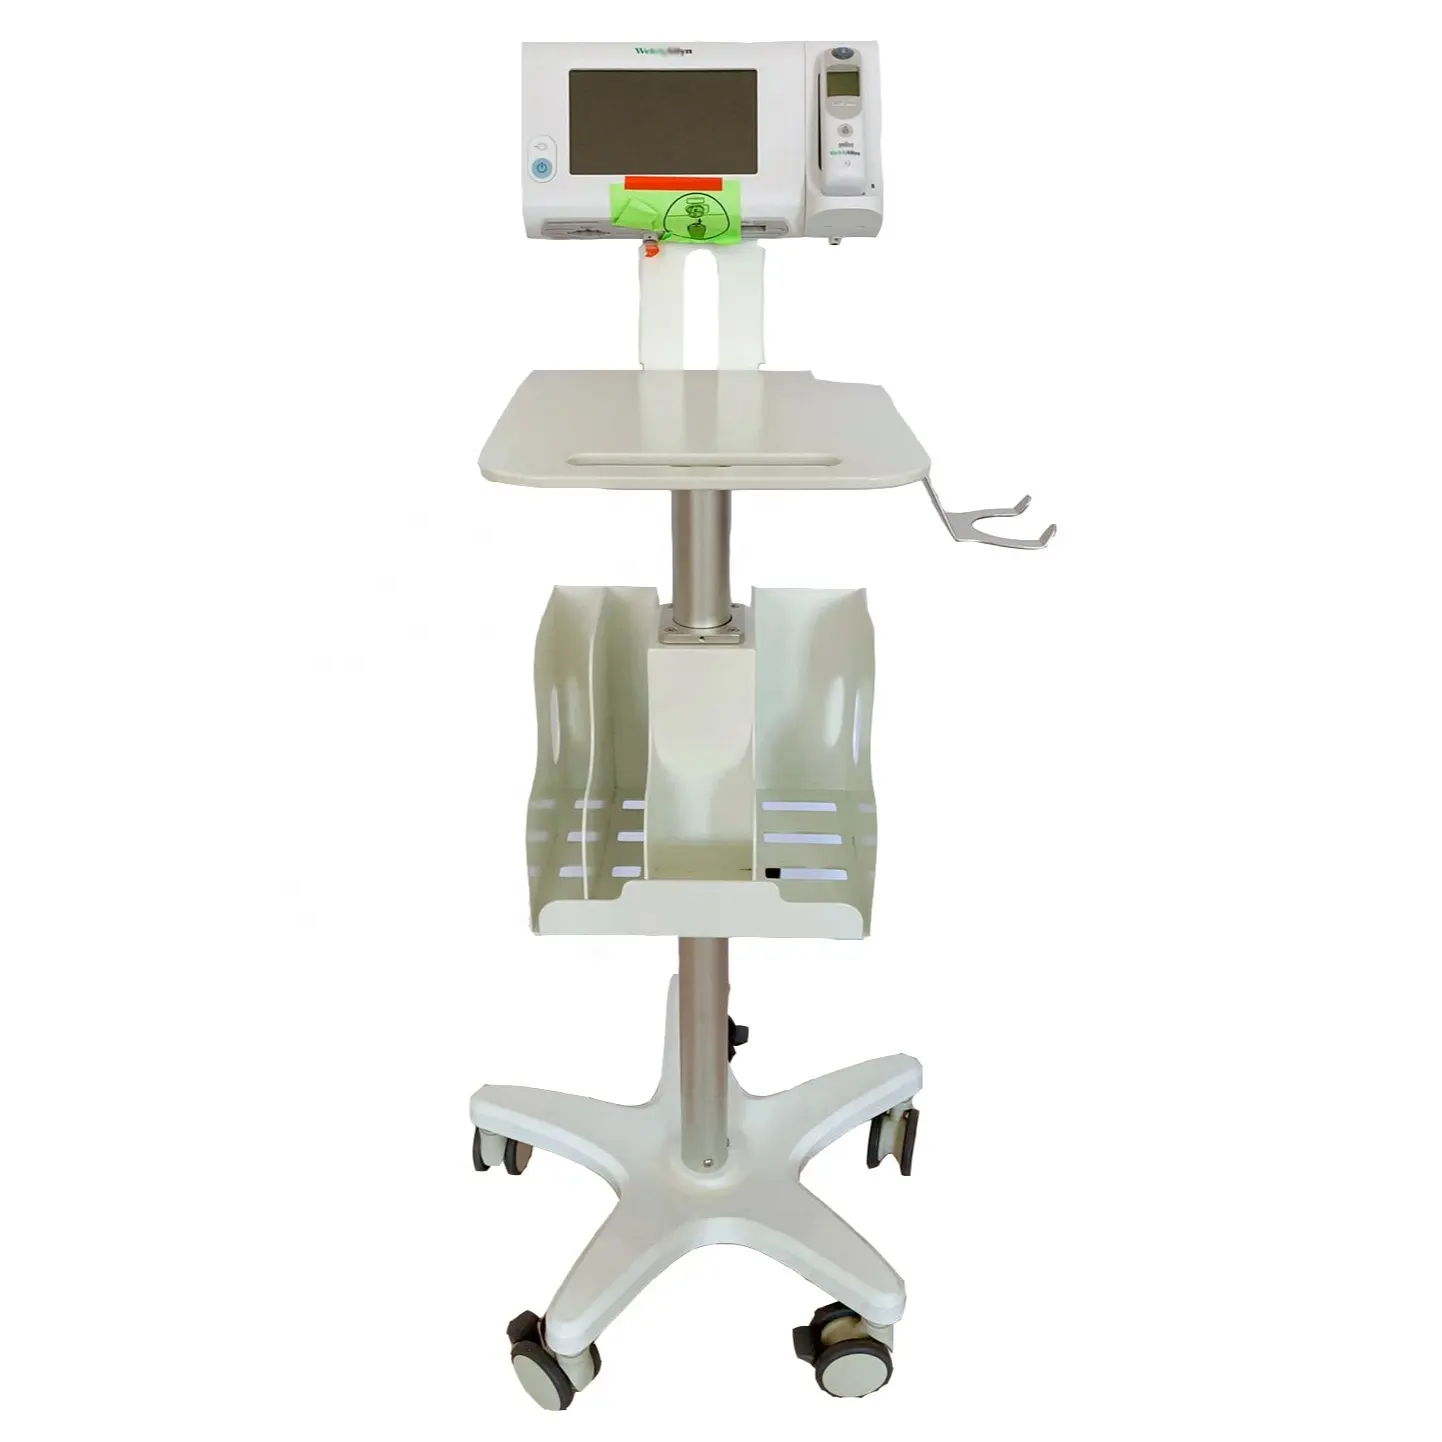 Vital Signs Monitor Stand Hospital Trolley Vital Signs Monitor With Stand Other Hospital Furniture Wheeled Cart For Medical Equipment